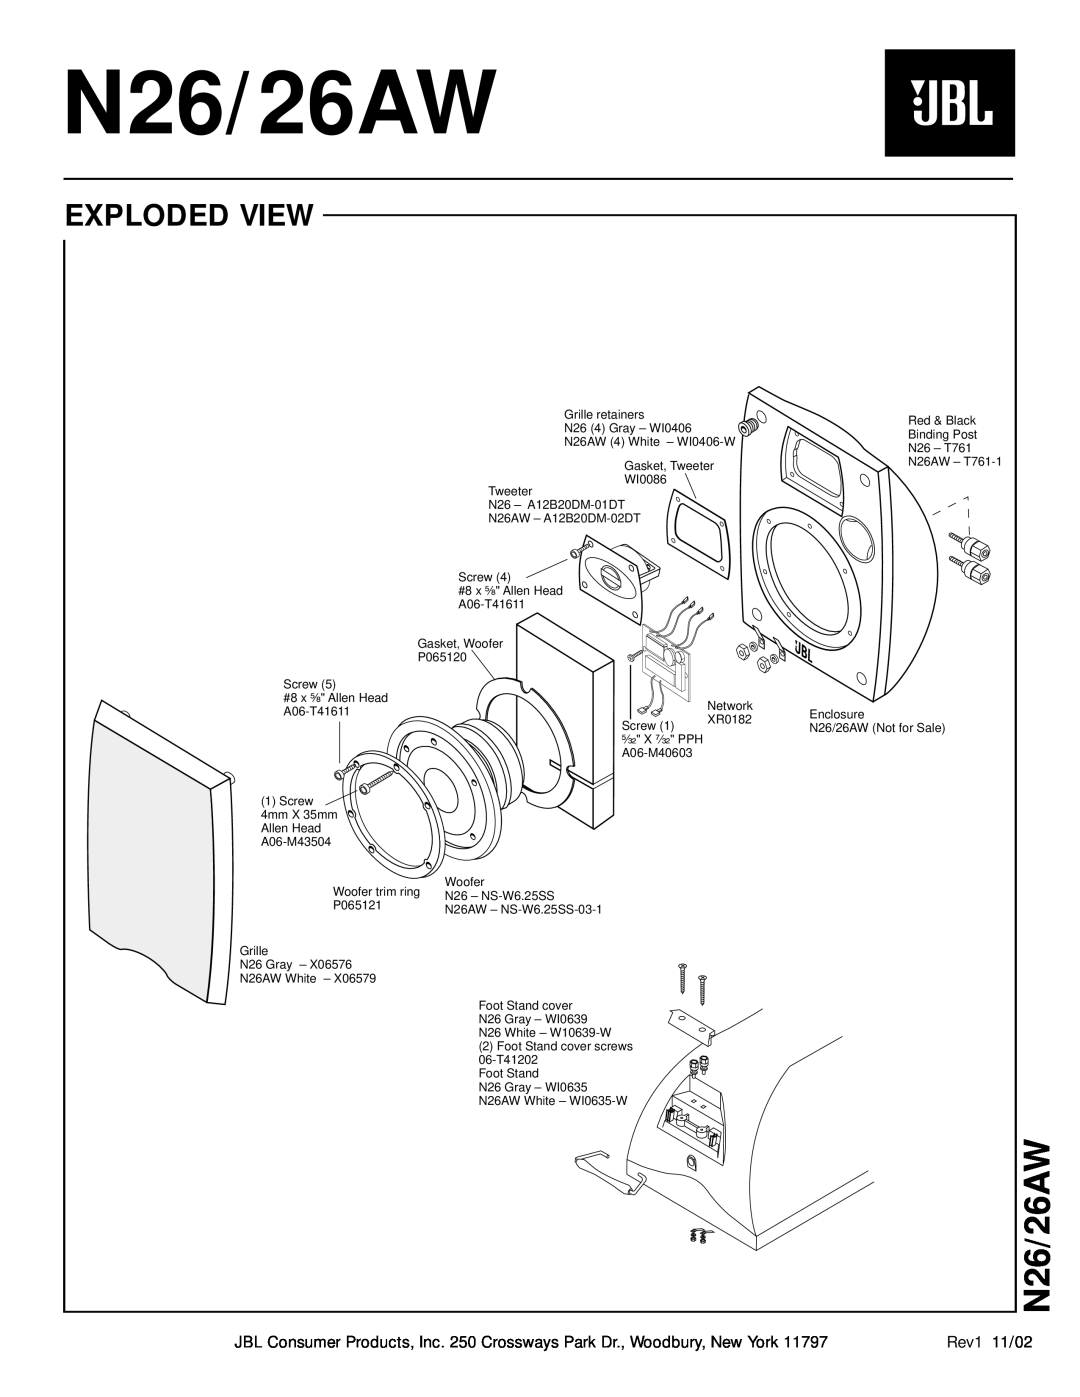 JBL N26/26AW technical manual Exploded View 